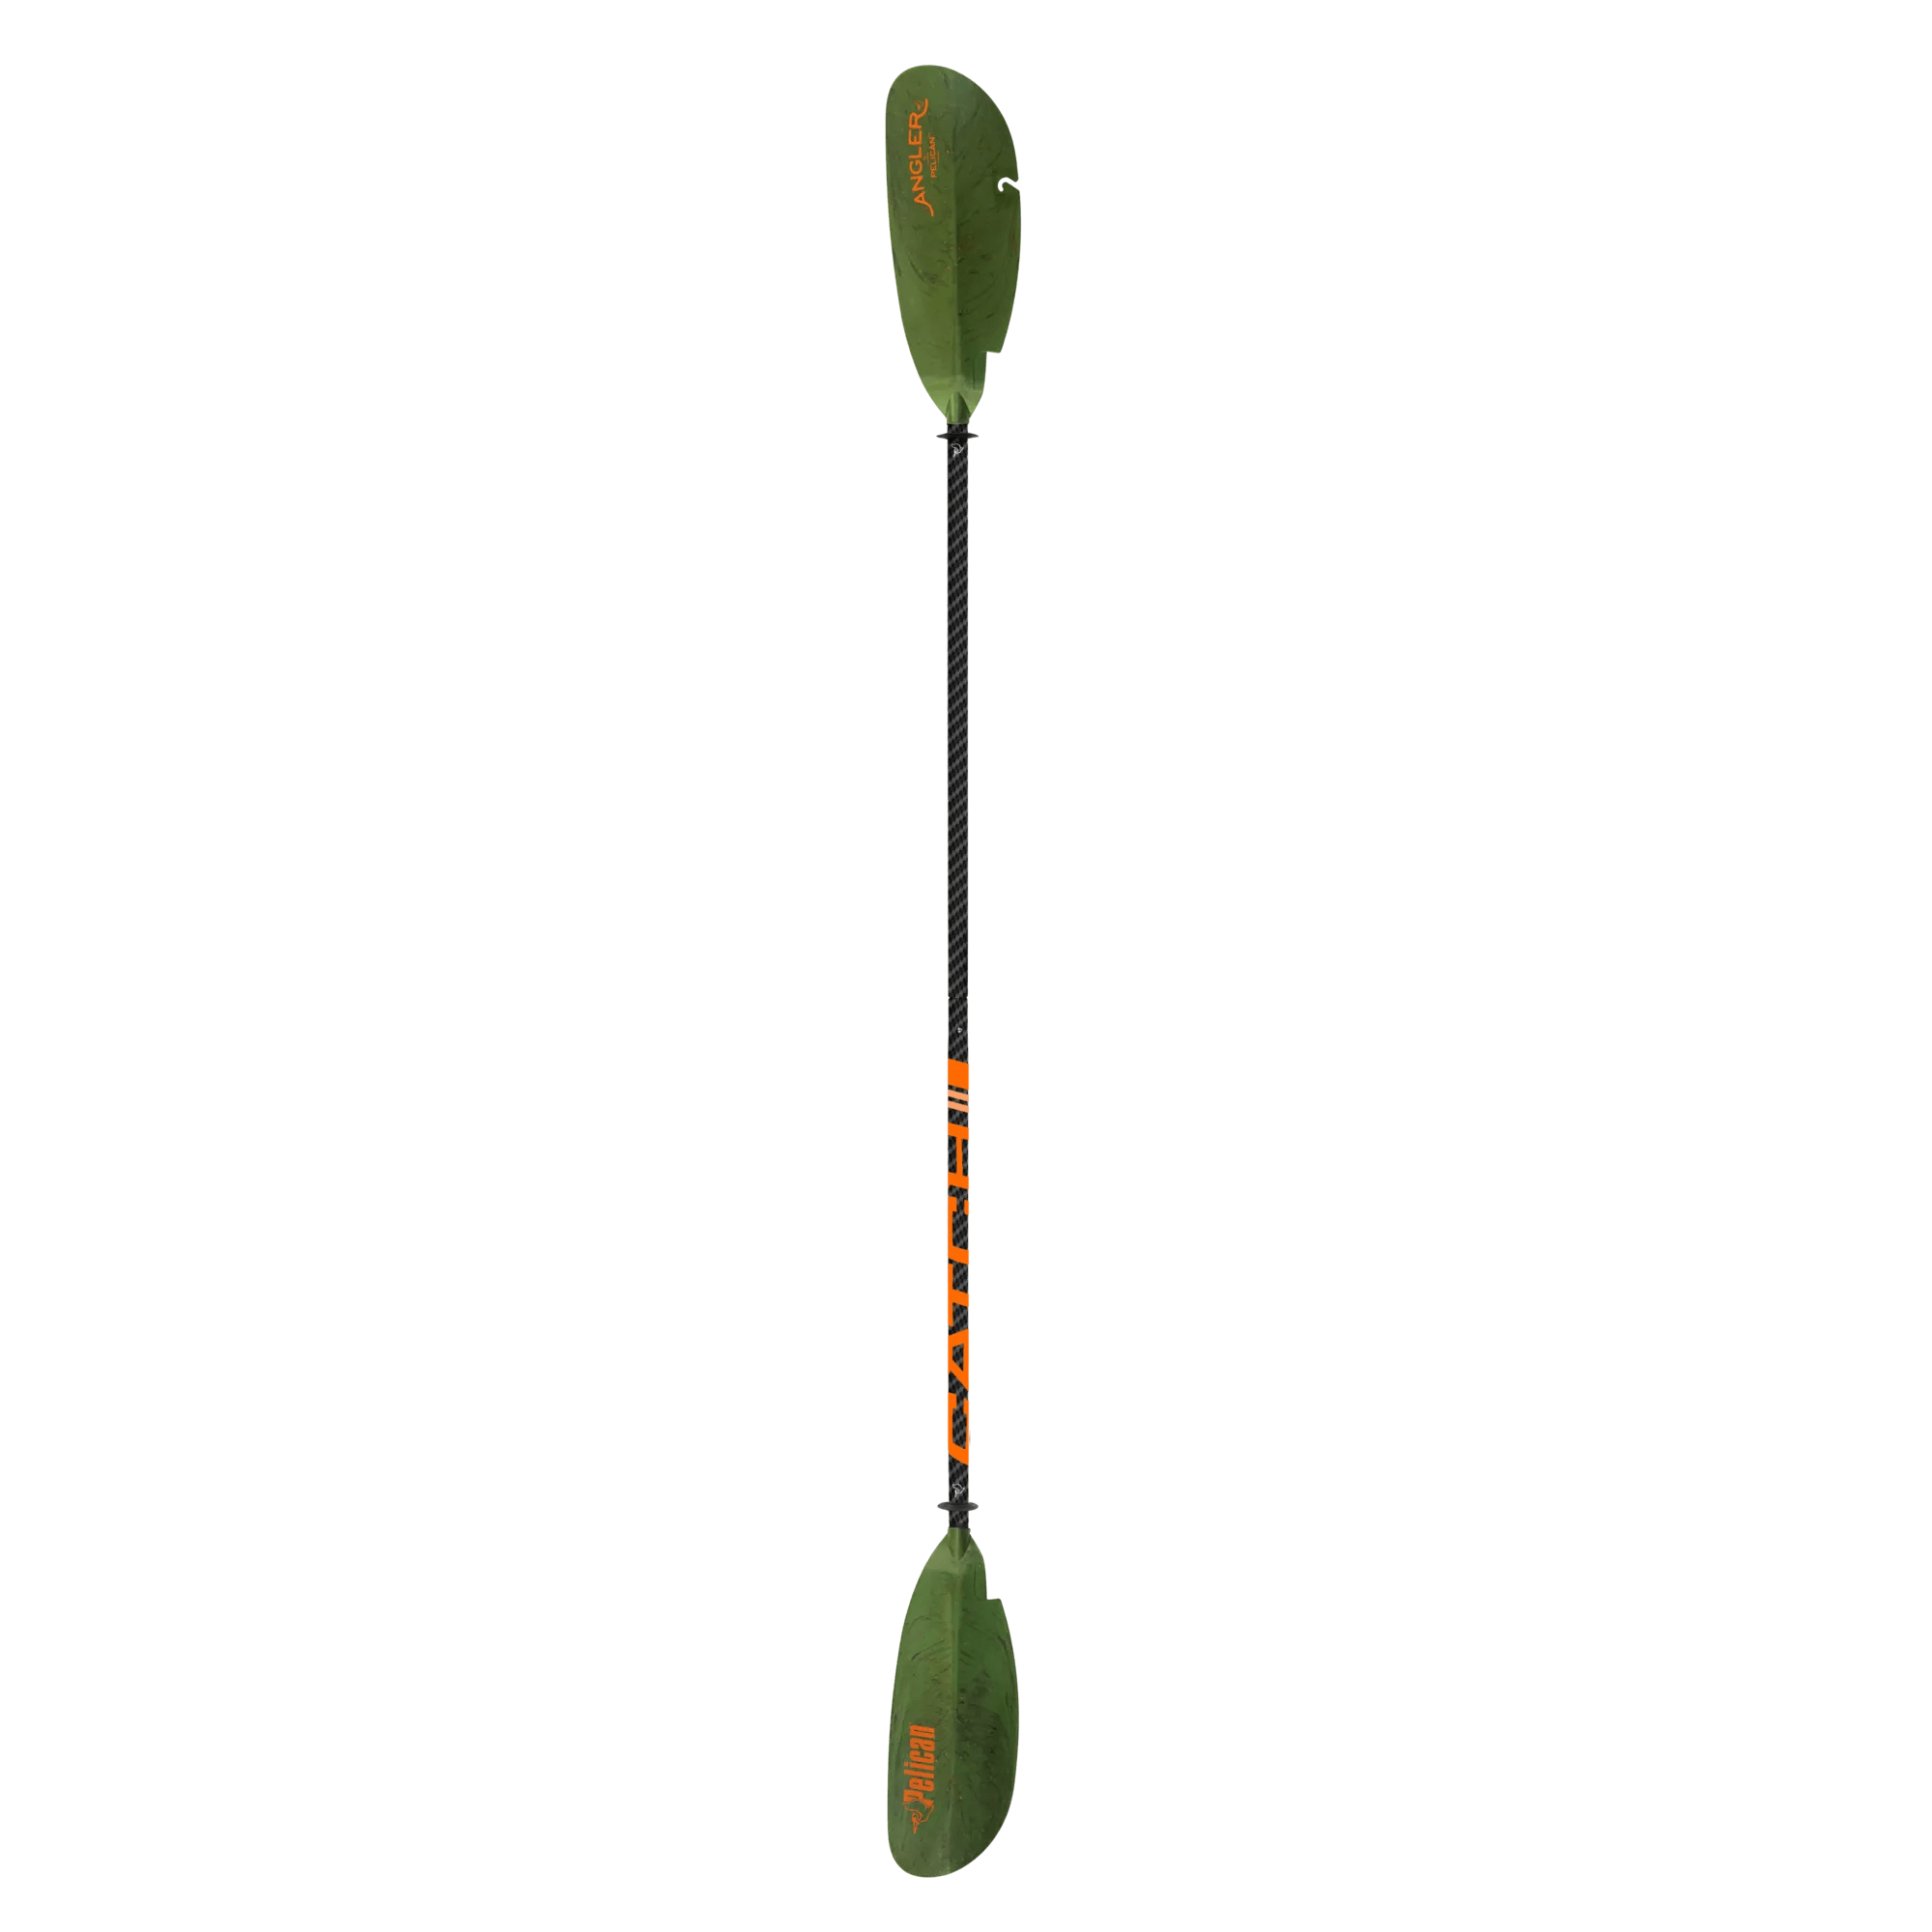 PELICAN - Catch Fishing Kayak Paddle 250 cm (98.5") - Olive - PS1975-00 - TOP